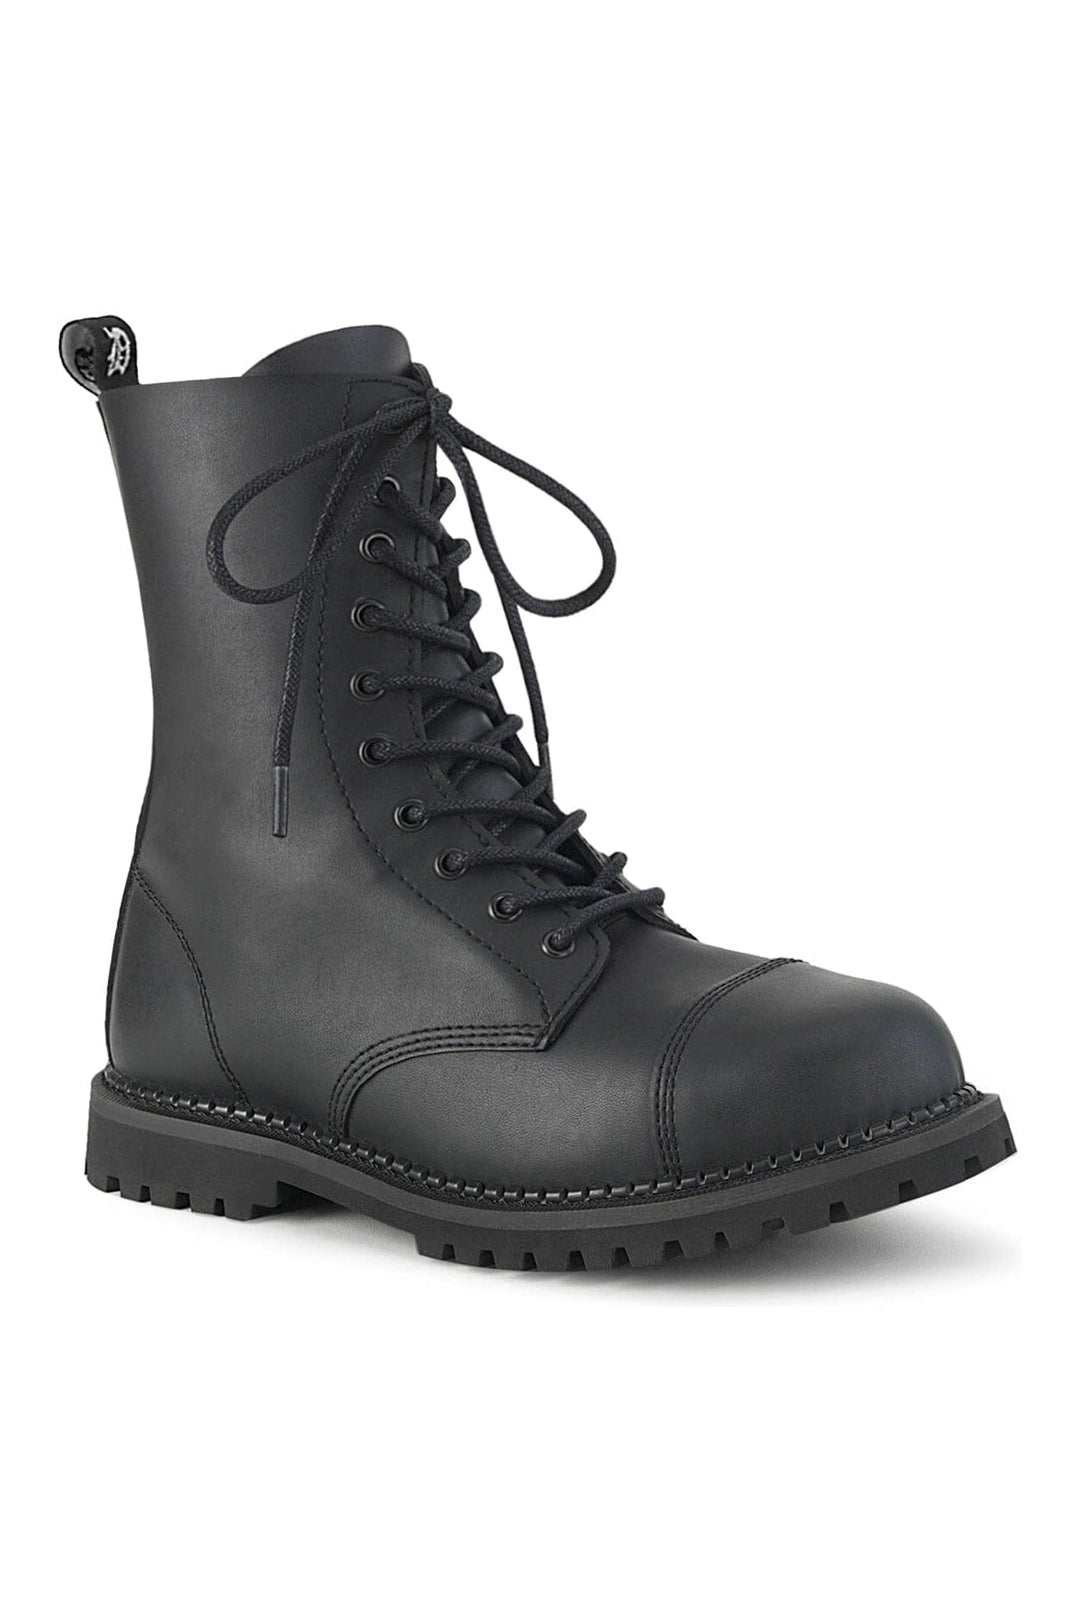 RIOT-10 Black Vegan Leather Ankle Boot-Ankle Boots-Demonia-Black-10-Vegan Leather-SEXYSHOES.COM